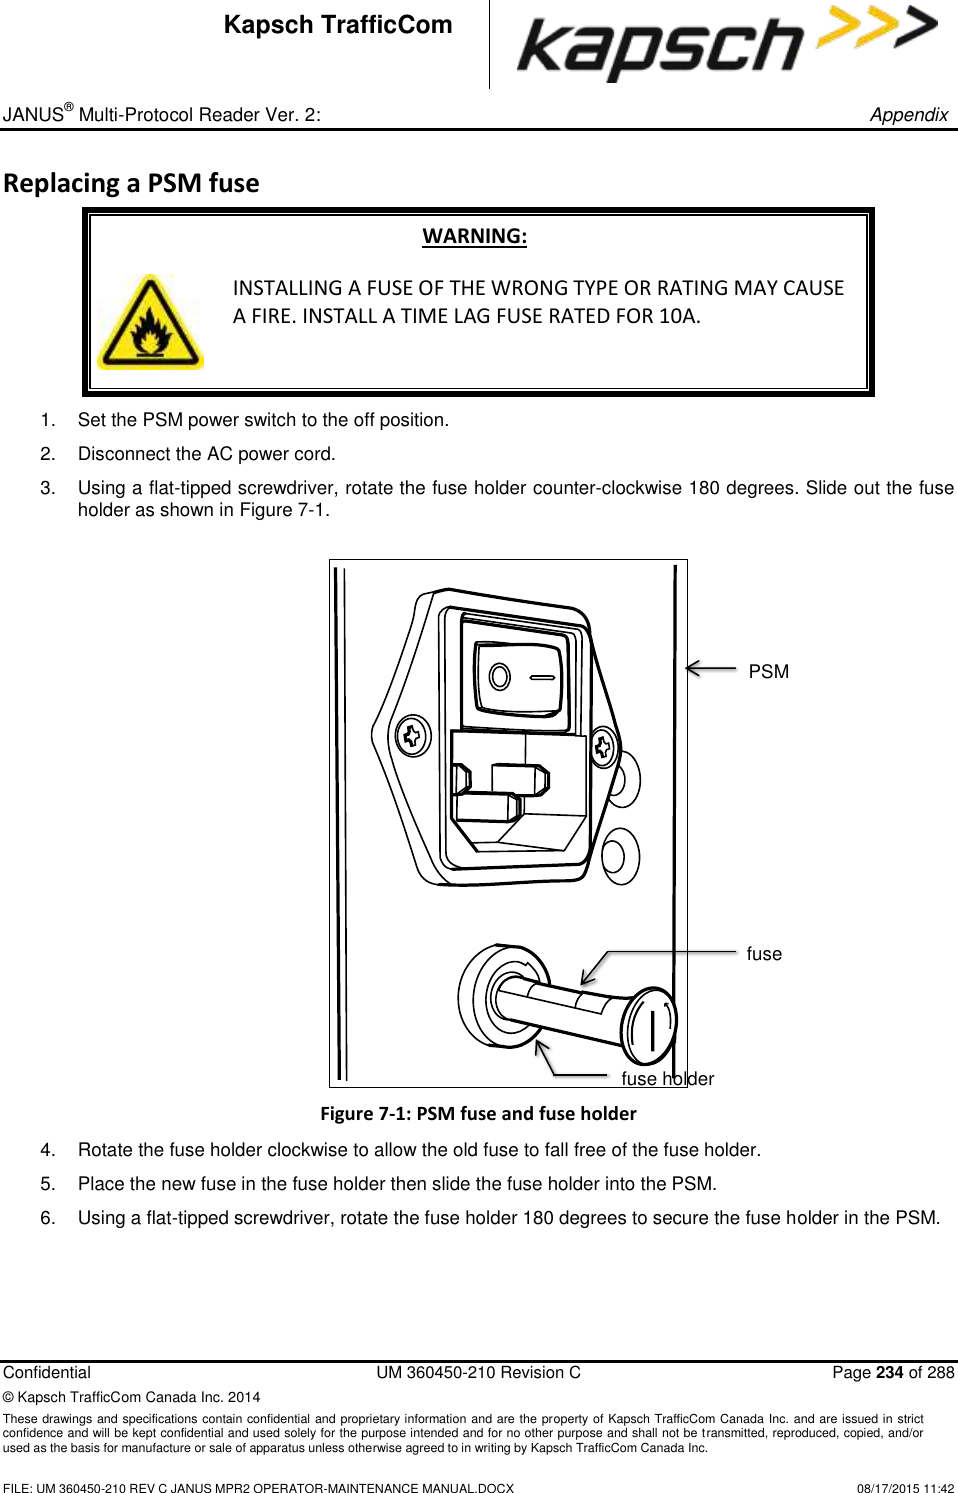 _ JANUS® Multi-Protocol Reader Ver. 2:       Appendix   Confidential  UM 360450-210 Revision C  Page 234 of 288 © Kapsch TrafficCom Canada Inc. 2014 These drawings and specifications contain confidential and proprietary information and are the property of Kapsch TrafficCom Canada Inc. and are issued in strict confidence and will be kept confidential and used solely for the purpose intended and for no other purpose and shall not be transmitted, reproduced, copied, and/or used as the basis for manufacture or sale of apparatus unless otherwise agreed to in writing by Kapsch TrafficCom Canada Inc.    FILE: UM 360450-210 REV C JANUS MPR2 OPERATOR-MAINTENANCE MANUAL.DOCX   08/17/2015 11:42 Kapsch TrafficCom Replacing a PSM fuse WARNING:  INSTALLING A FUSE OF THE WRONG TYPE OR RATING MAY CAUSE A FIRE. INSTALL A TIME LAG FUSE RATED FOR 10A. 1.  Set the PSM power switch to the off position. 2.  Disconnect the AC power cord. 3.  Using a flat-tipped screwdriver, rotate the fuse holder counter-clockwise 180 degrees. Slide out the fuse holder as shown in Figure 7-1. Figure 7-1: PSM fuse and fuse holder 4.  Rotate the fuse holder clockwise to allow the old fuse to fall free of the fuse holder.  5.  Place the new fuse in the fuse holder then slide the fuse holder into the PSM.  6.  Using a flat-tipped screwdriver, rotate the fuse holder 180 degrees to secure the fuse holder in the PSM. PSM fuse holder fuse 